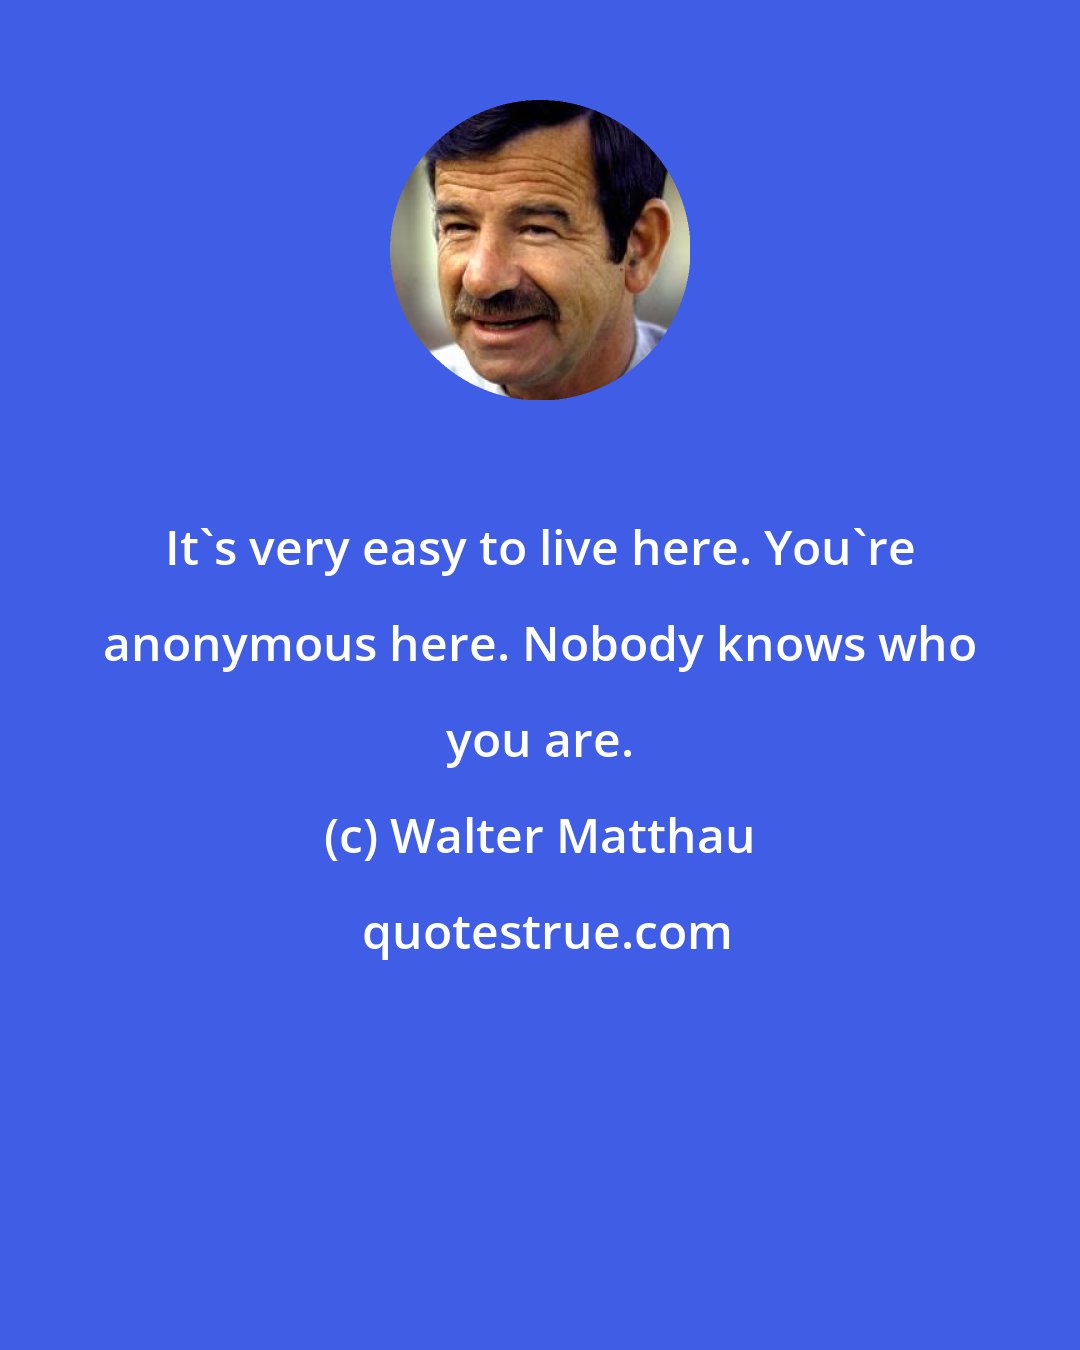 Walter Matthau: It's very easy to live here. You're anonymous here. Nobody knows who you are.